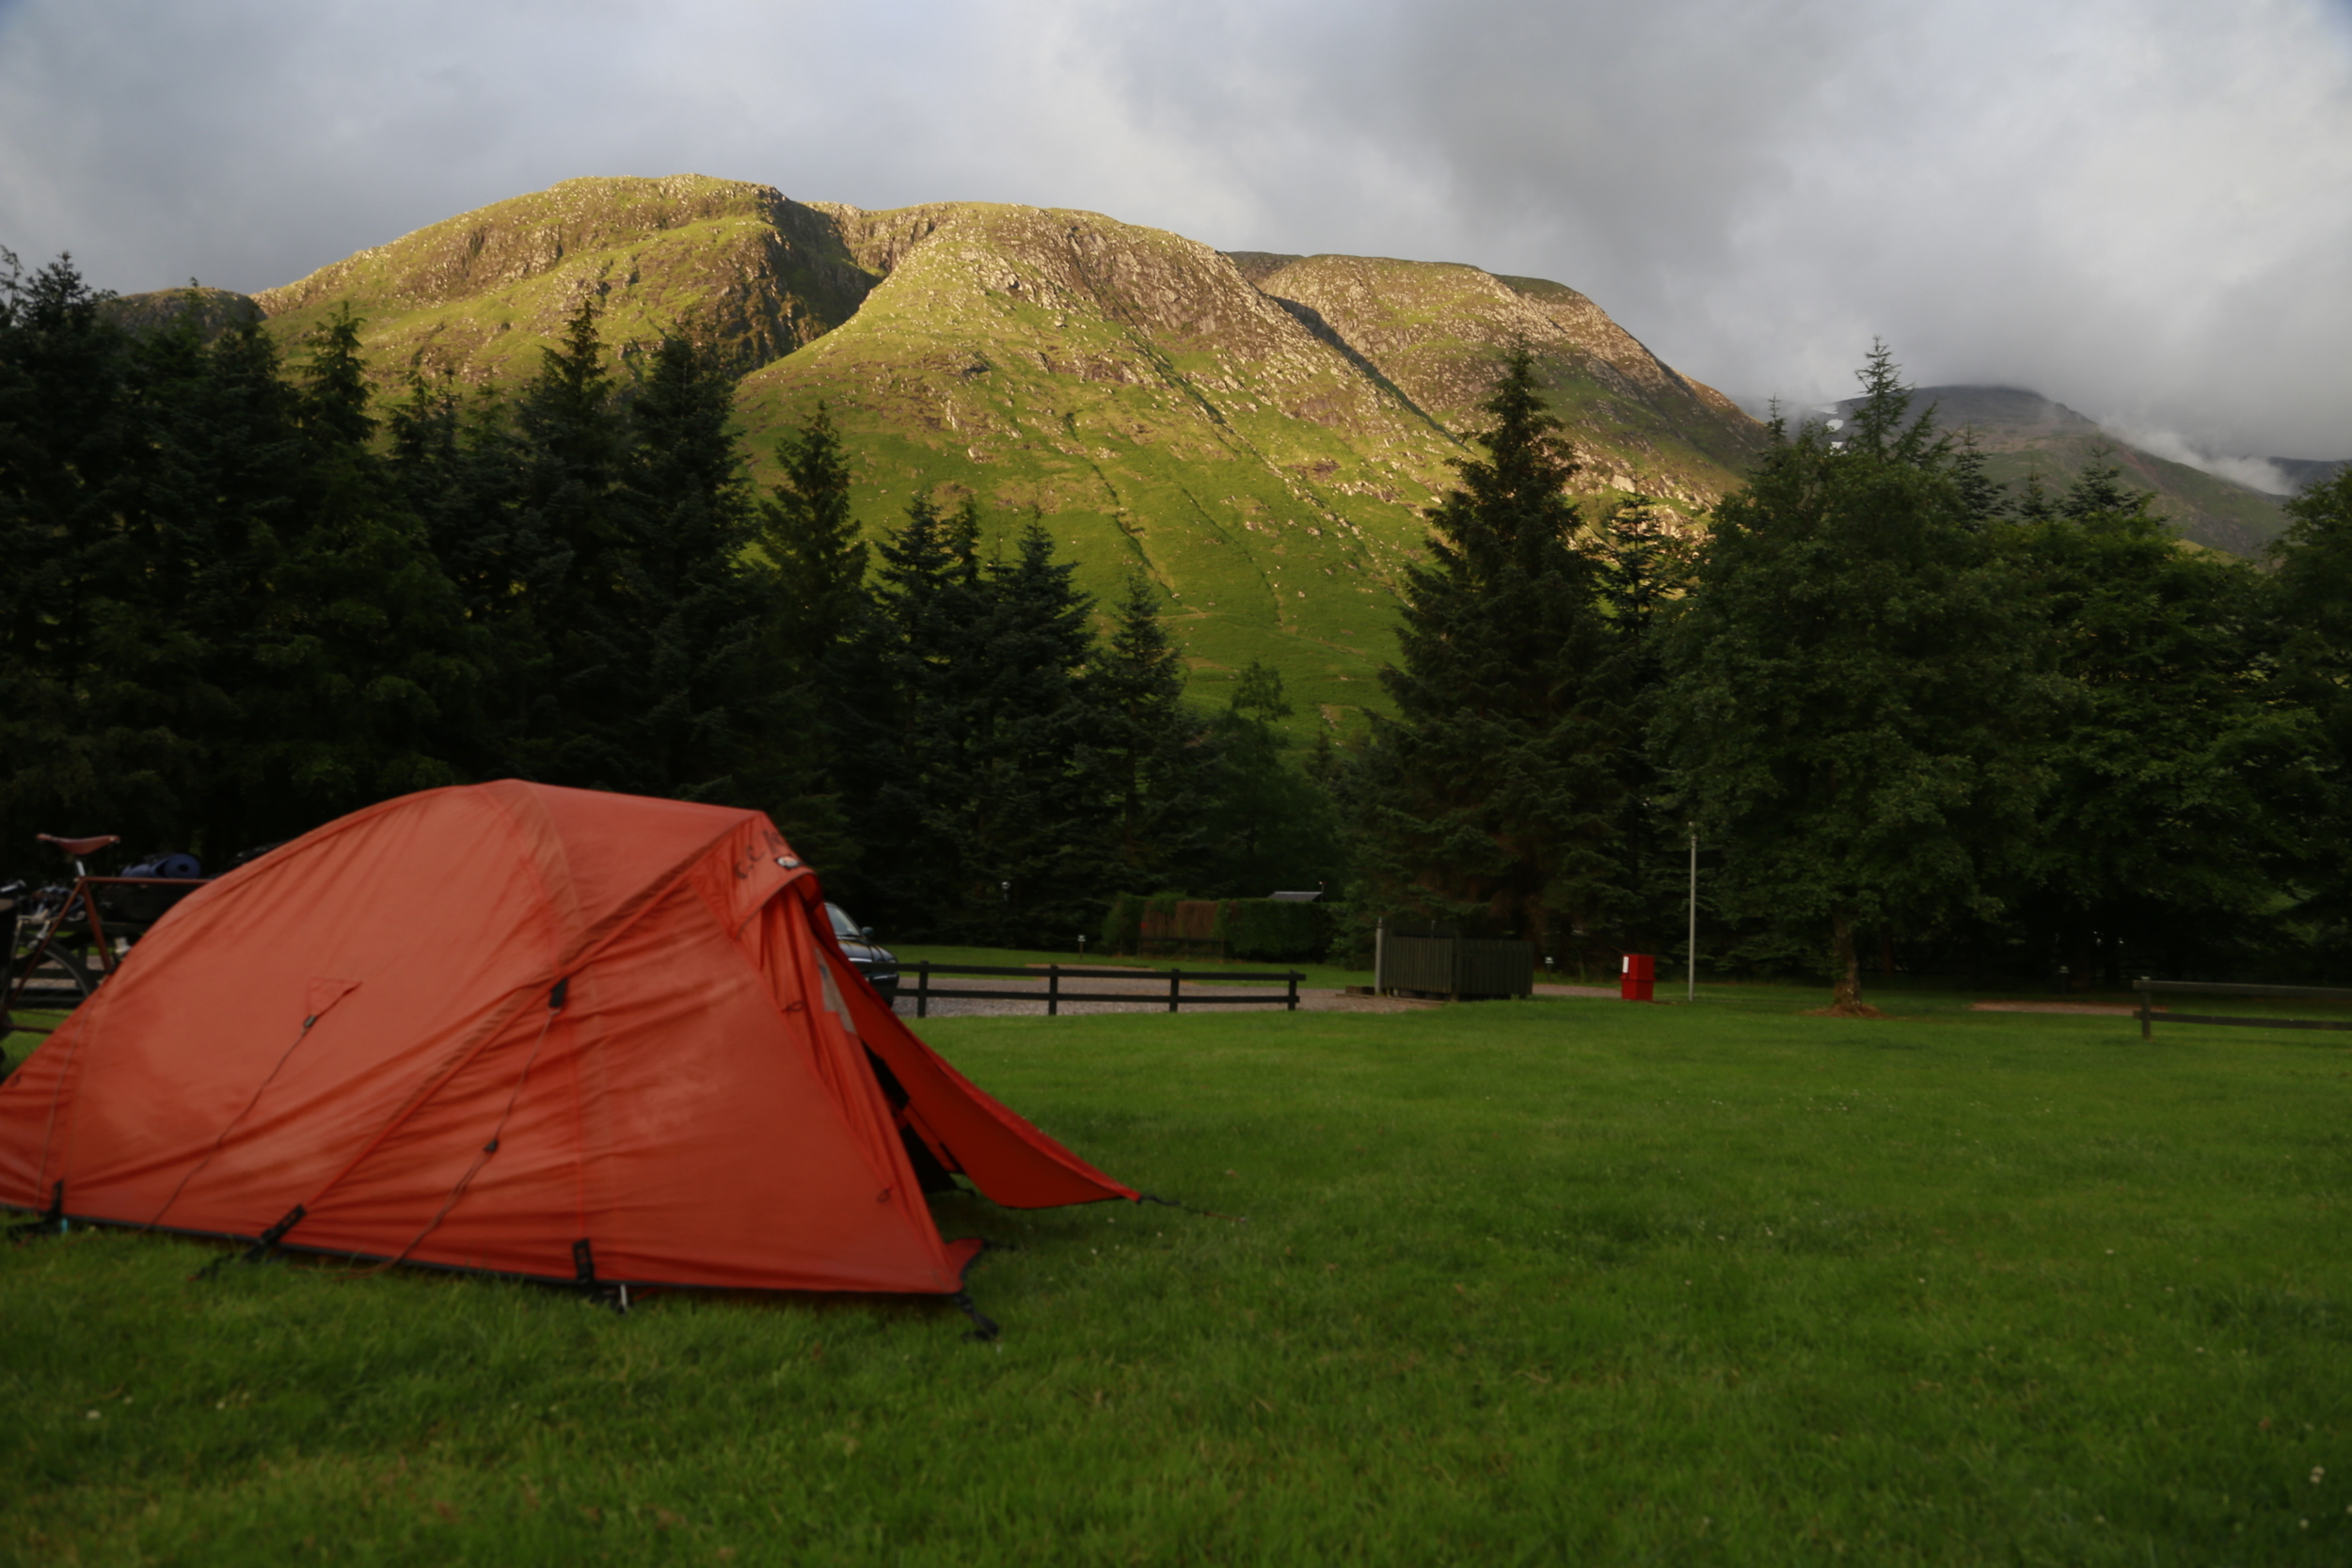 scotland, snowdonia, nature, wild, camping, hilleberg, hiking, lost, forest, fire, camp, swiss army, leatherman, sleeping bag, escape, scenery, tent, stove, MSR, 